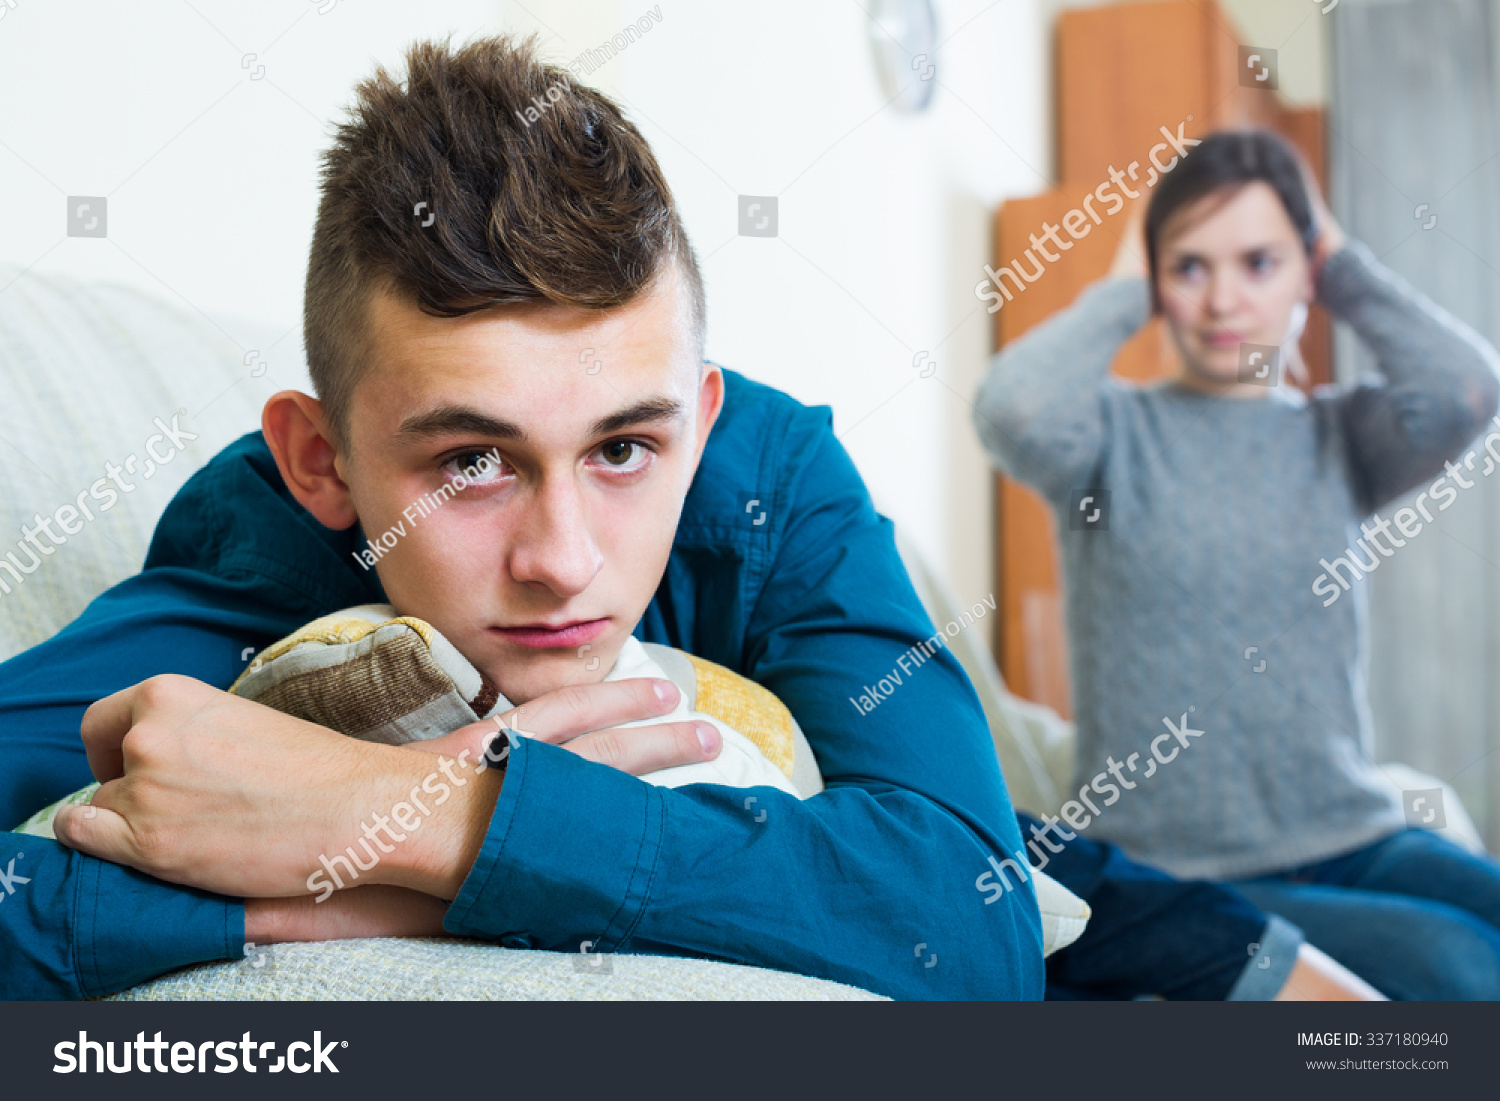 Frustrated mother scolding teenager son at home. focus on american boy #337180940